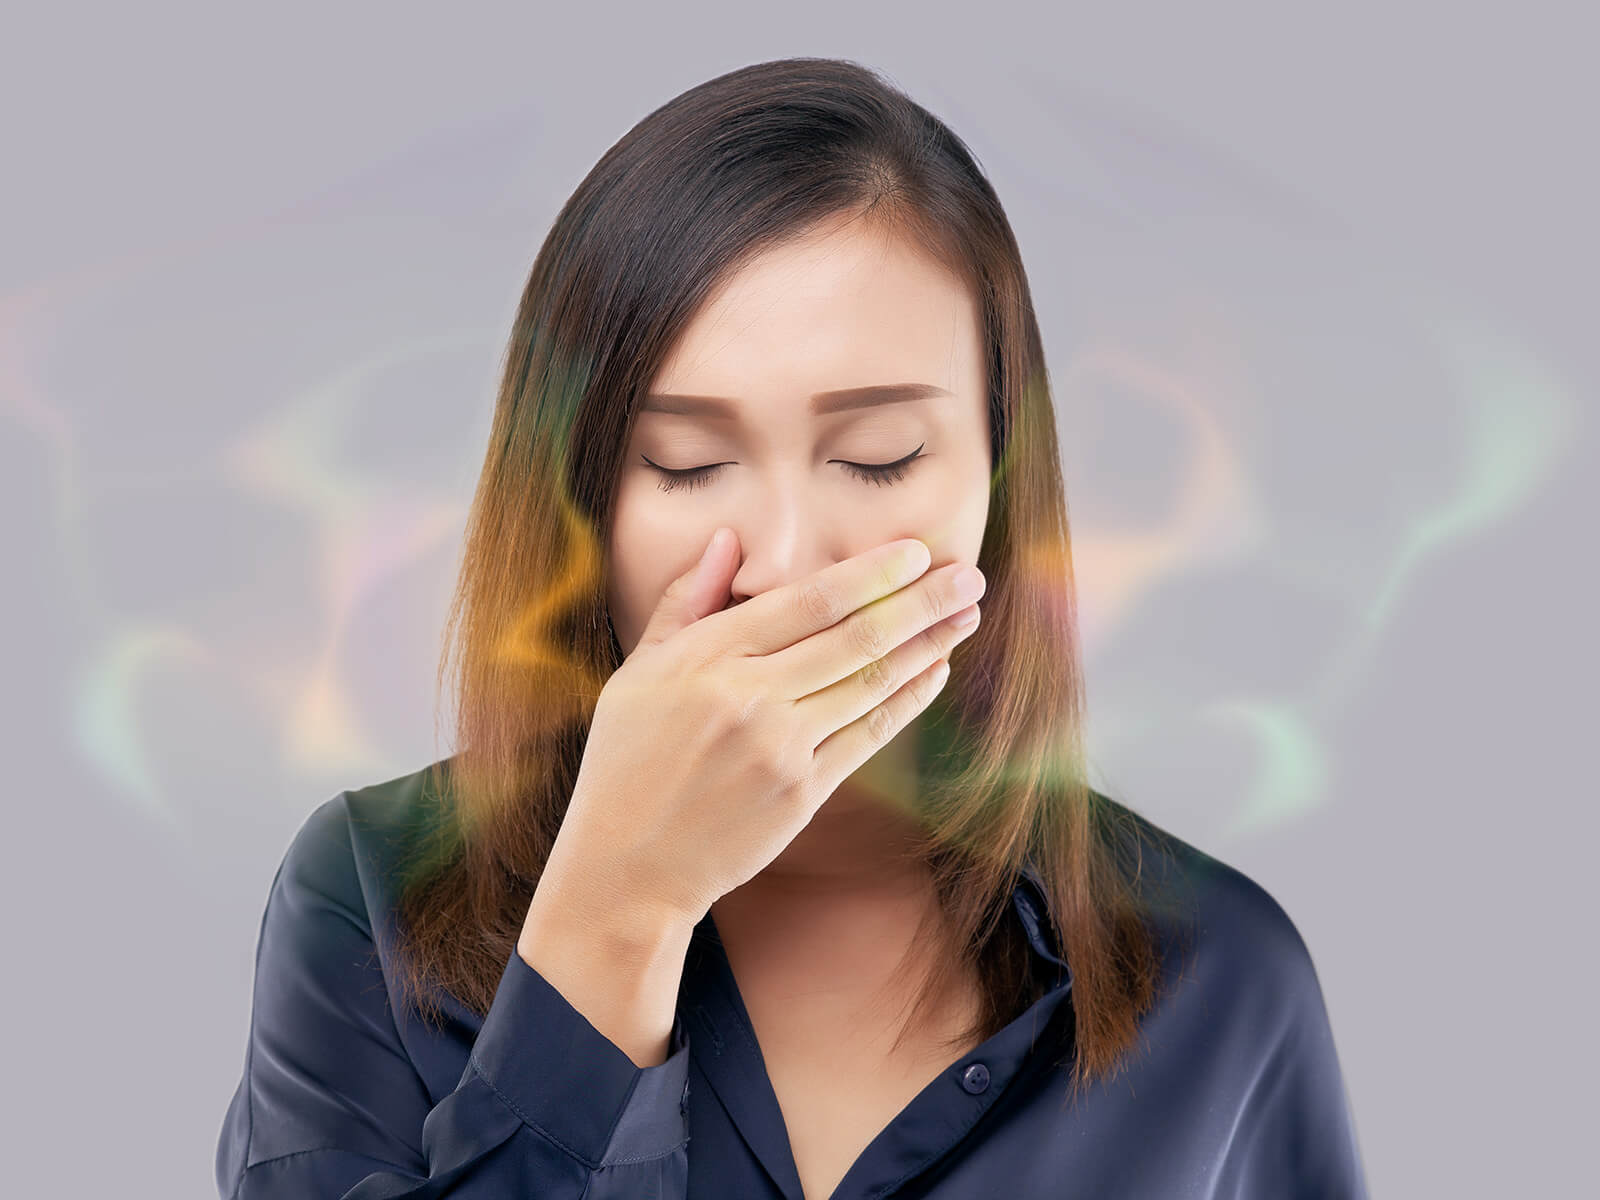 5 Ways To Fight Denture odors And Bad Breath